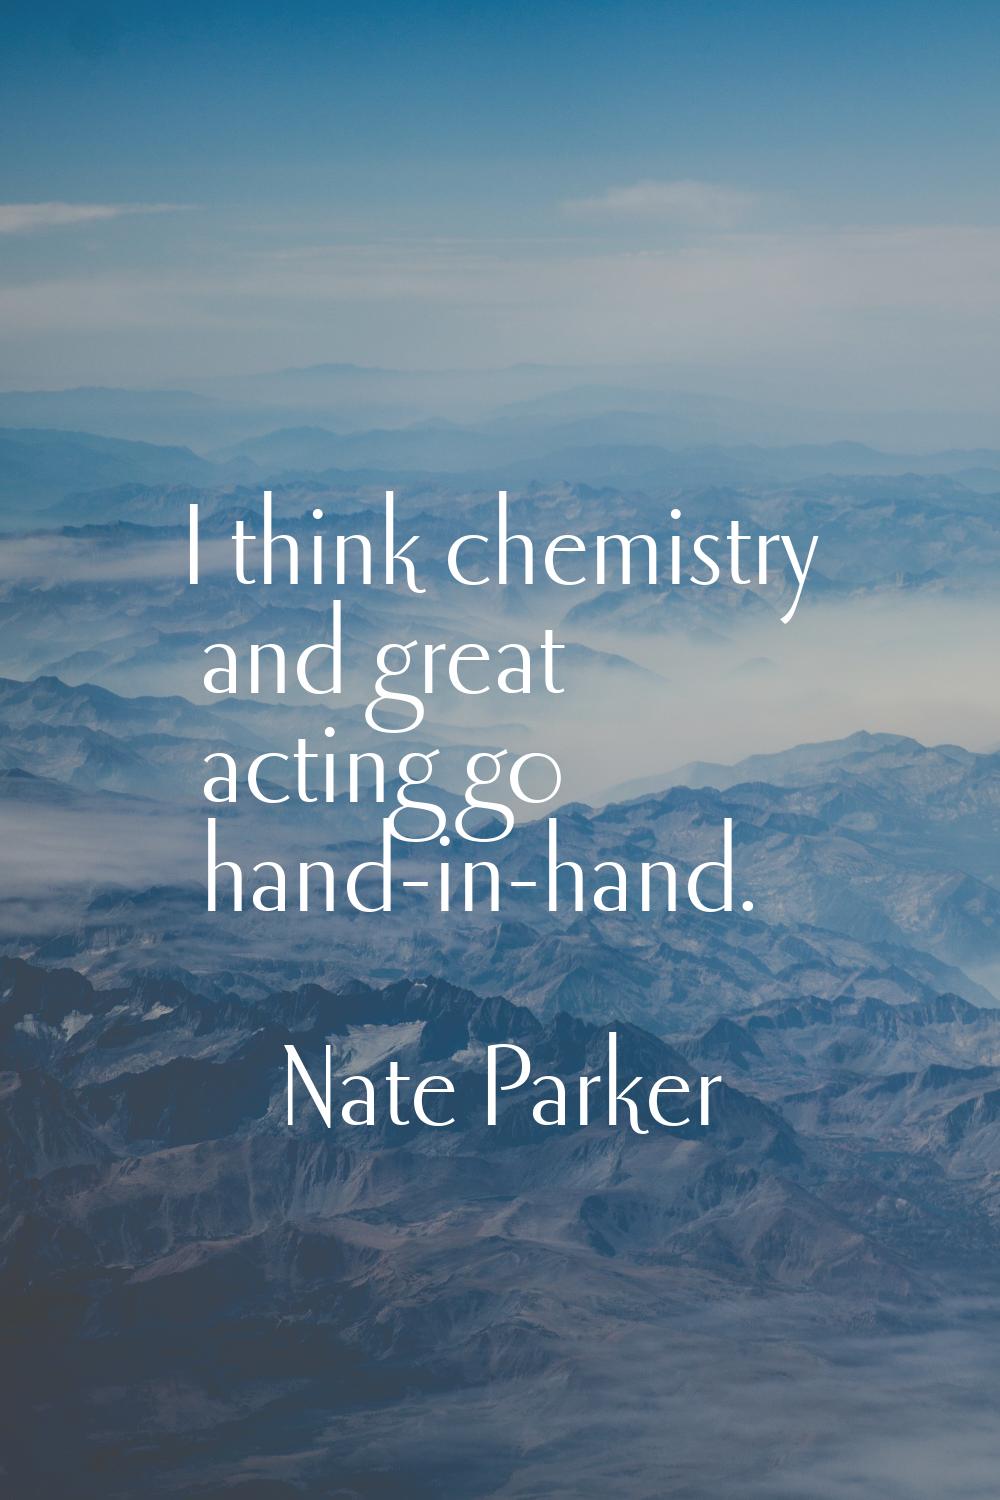 I think chemistry and great acting go hand-in-hand.